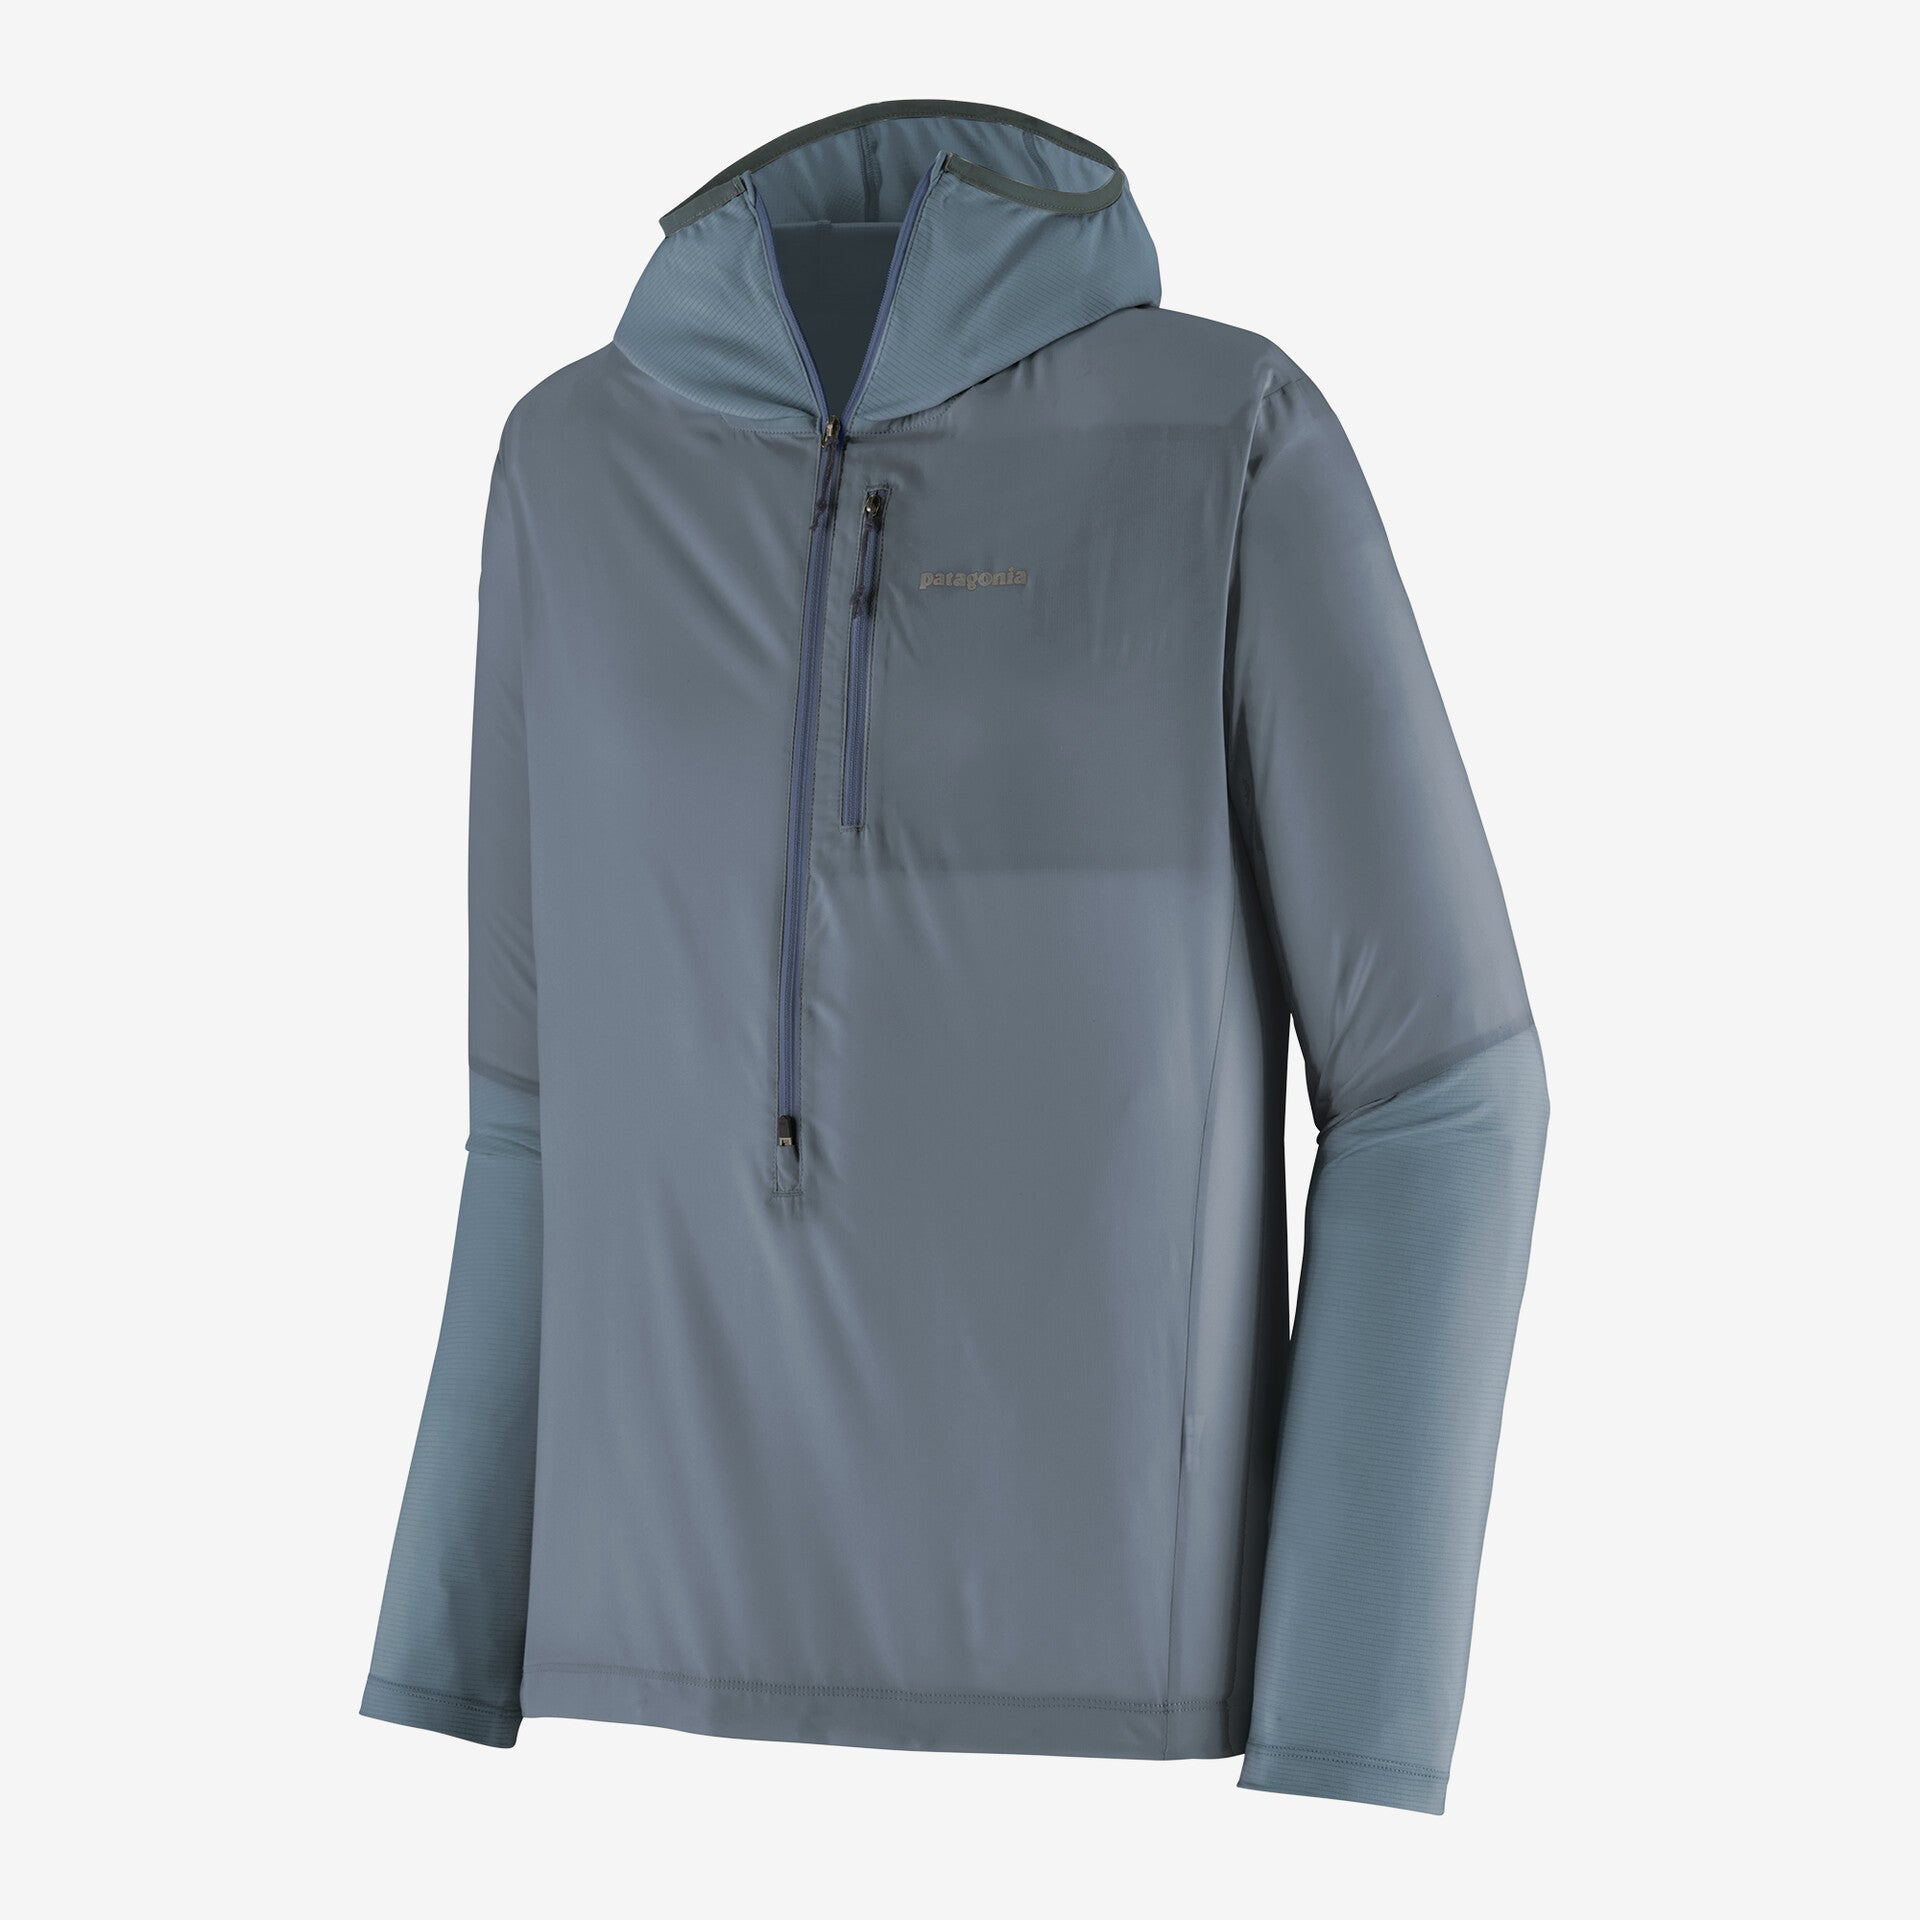 PATAGONIA MEN'S AIRSHED PRO PULLOVER - UTB UTILITY BLUE XS